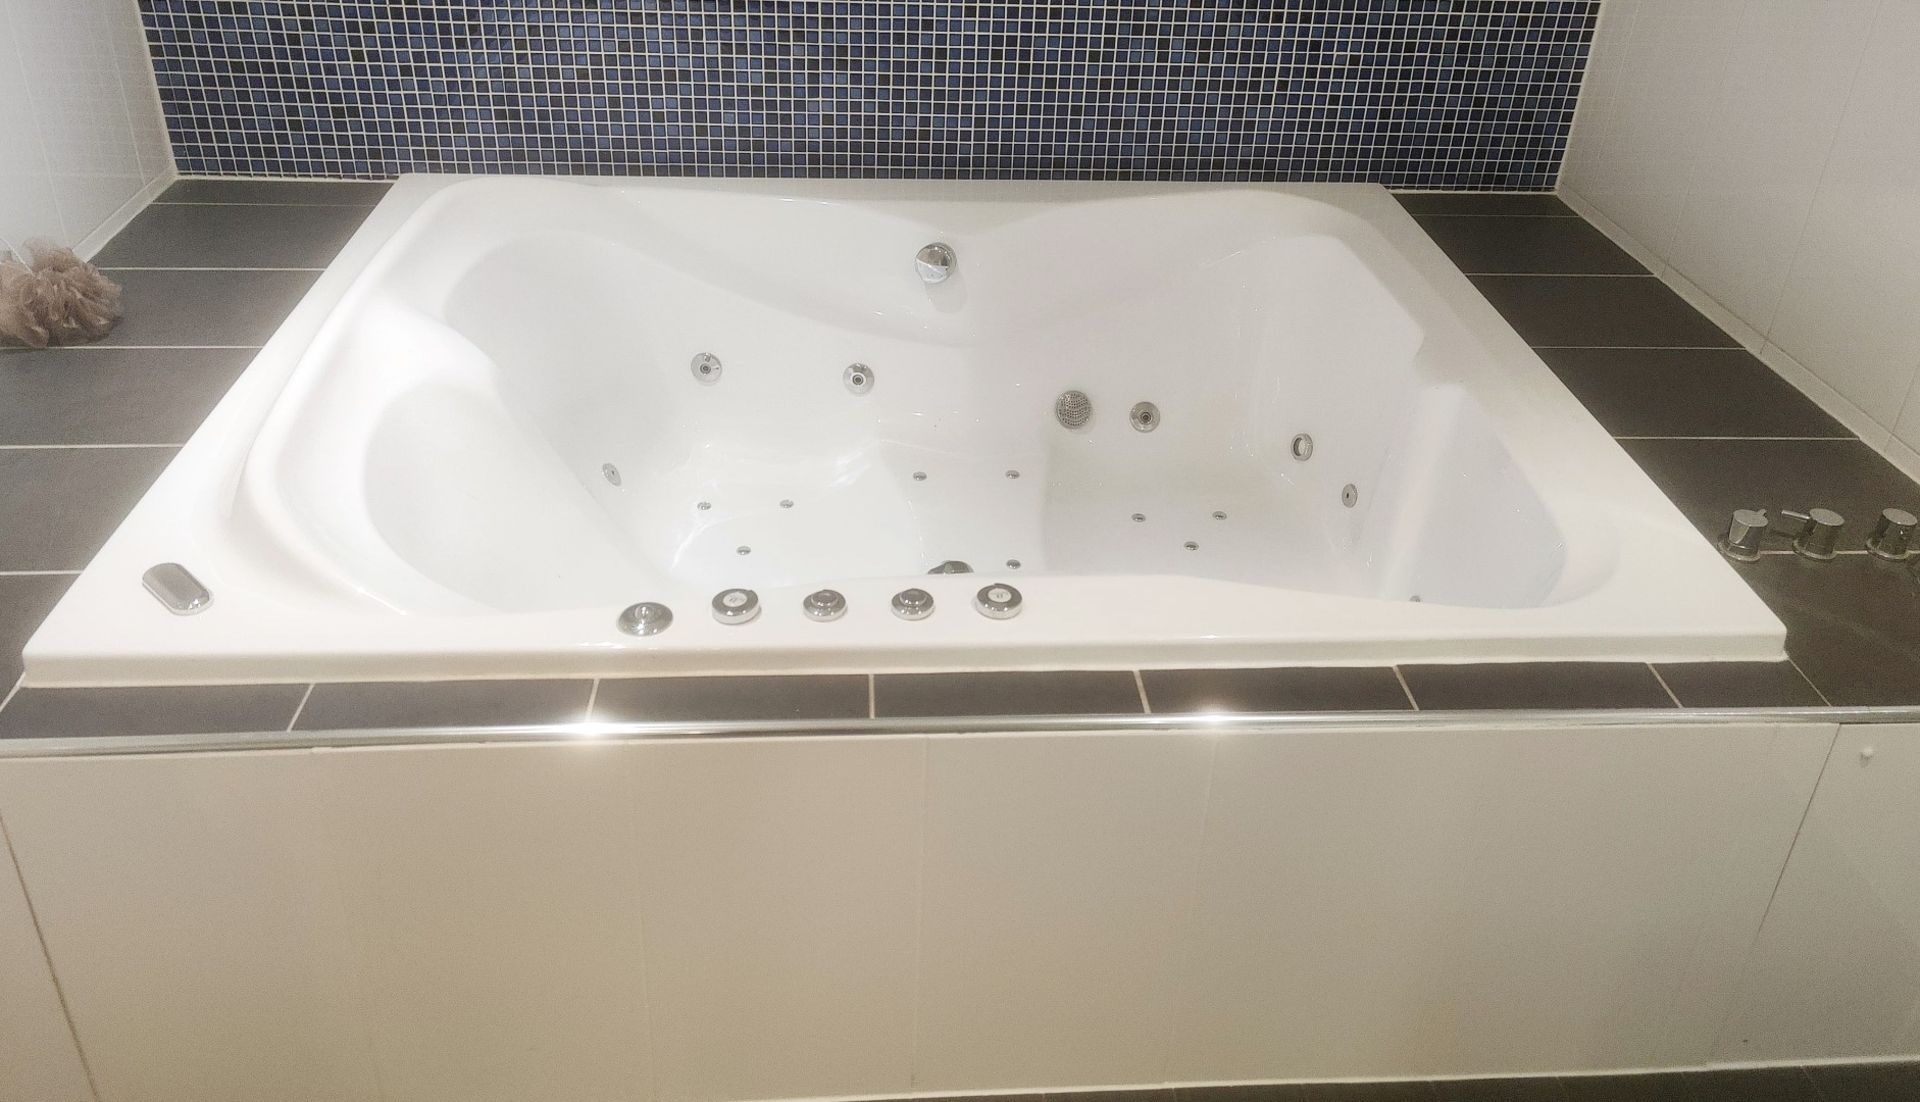 1 x Bronte Jacuzzi Whirlpool Bath - Approx 6.5ft x 5ft Size - Includes Brassware, Water Jets & Pump - Image 7 of 15